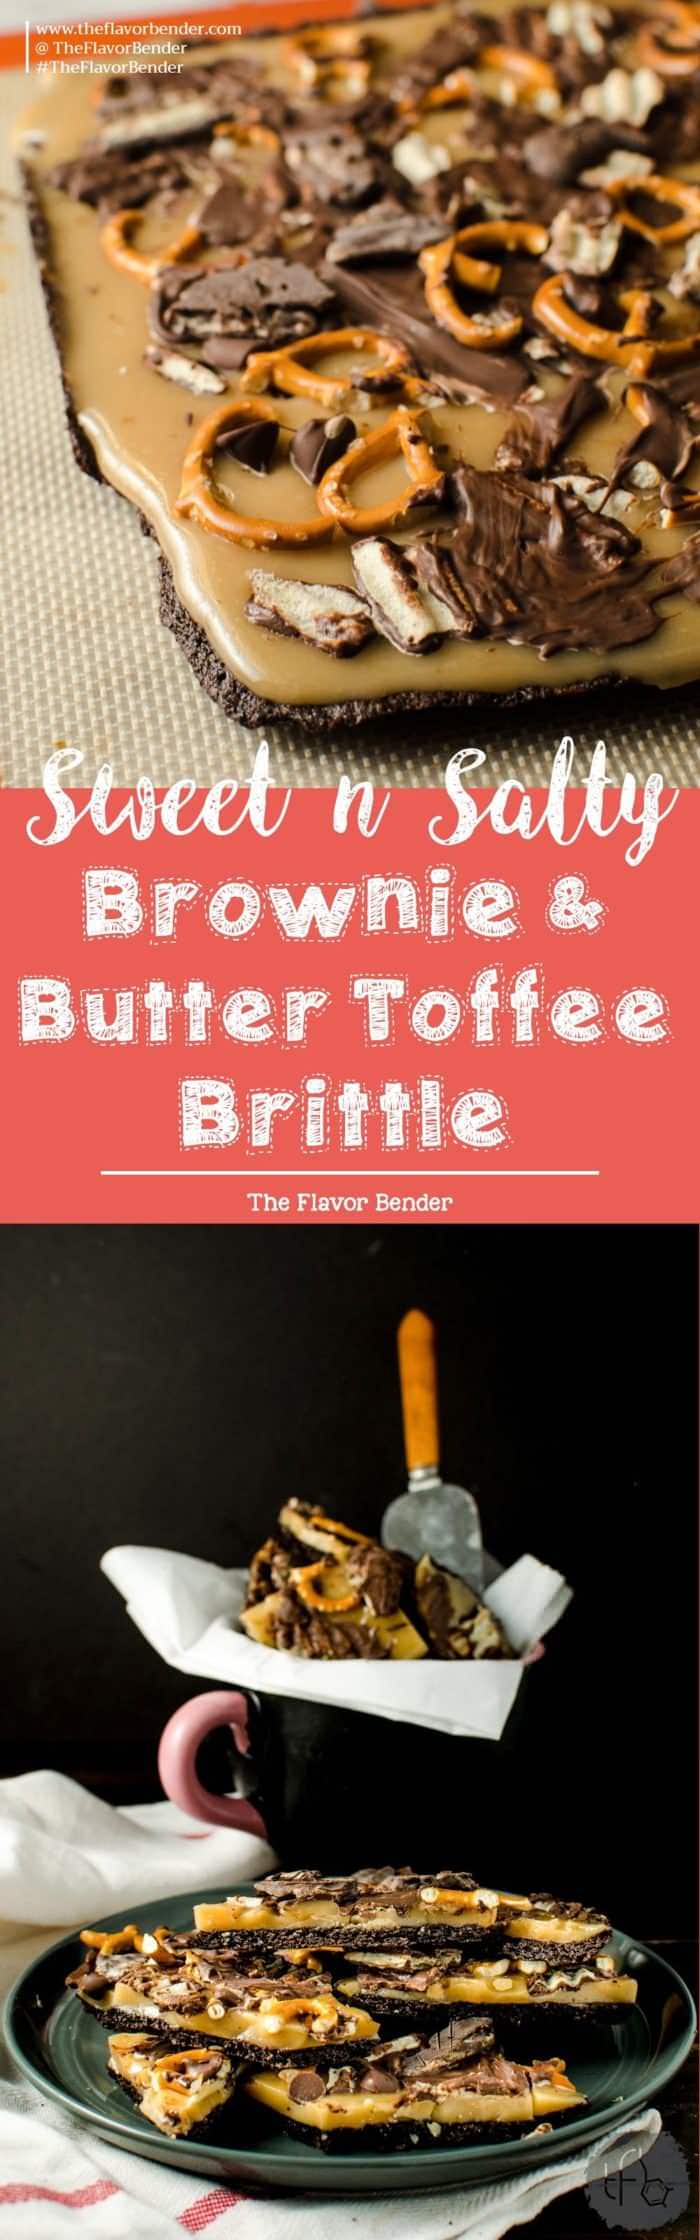 Sweet & Salty Brownie and Butter Toffee Brittle - Chewy chocolate brownie brittle, coated with an addictive buttery toffee layer and then sprinkled with salt, salted pretzel pieces, chocolate and Dark Chocolate Wavy Lays potato chips! Easy, customizable and makes for an excellent gift during the holiday season too!